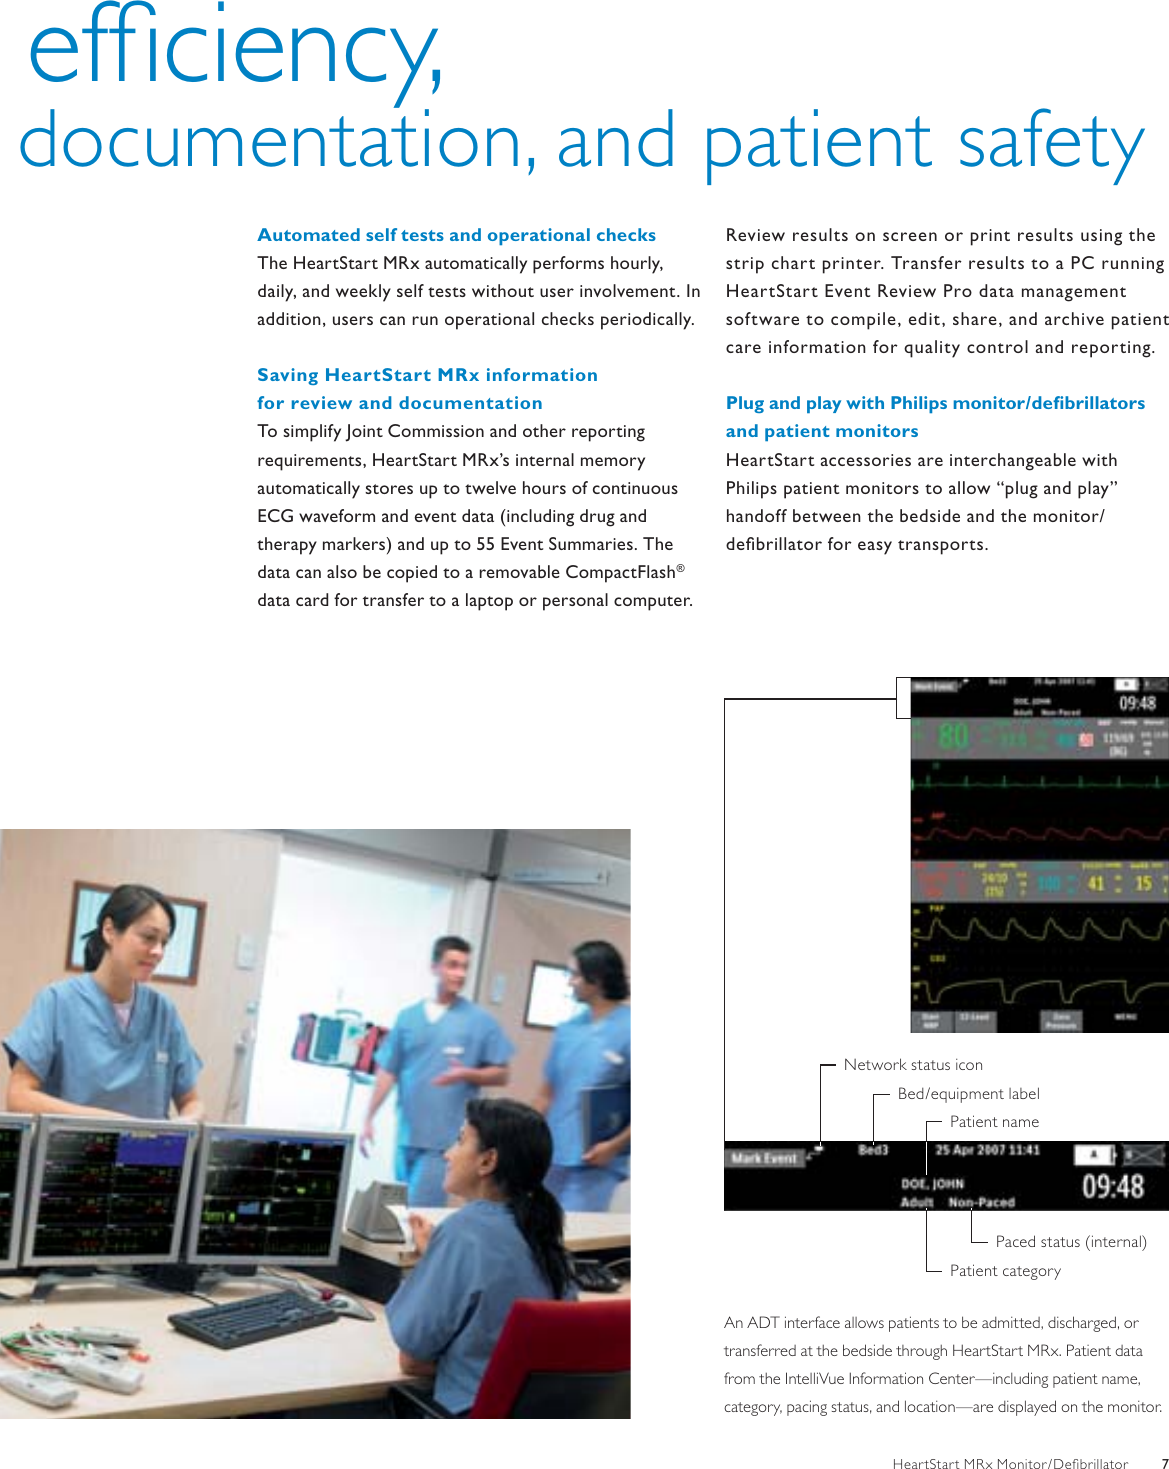 Page 7 of 12 - Philips 4522_962_24371 MRx Monitor/Defibrillator With Q-CPR And Intelli Vue Clinical Network Brochure - Hospital (ENG)